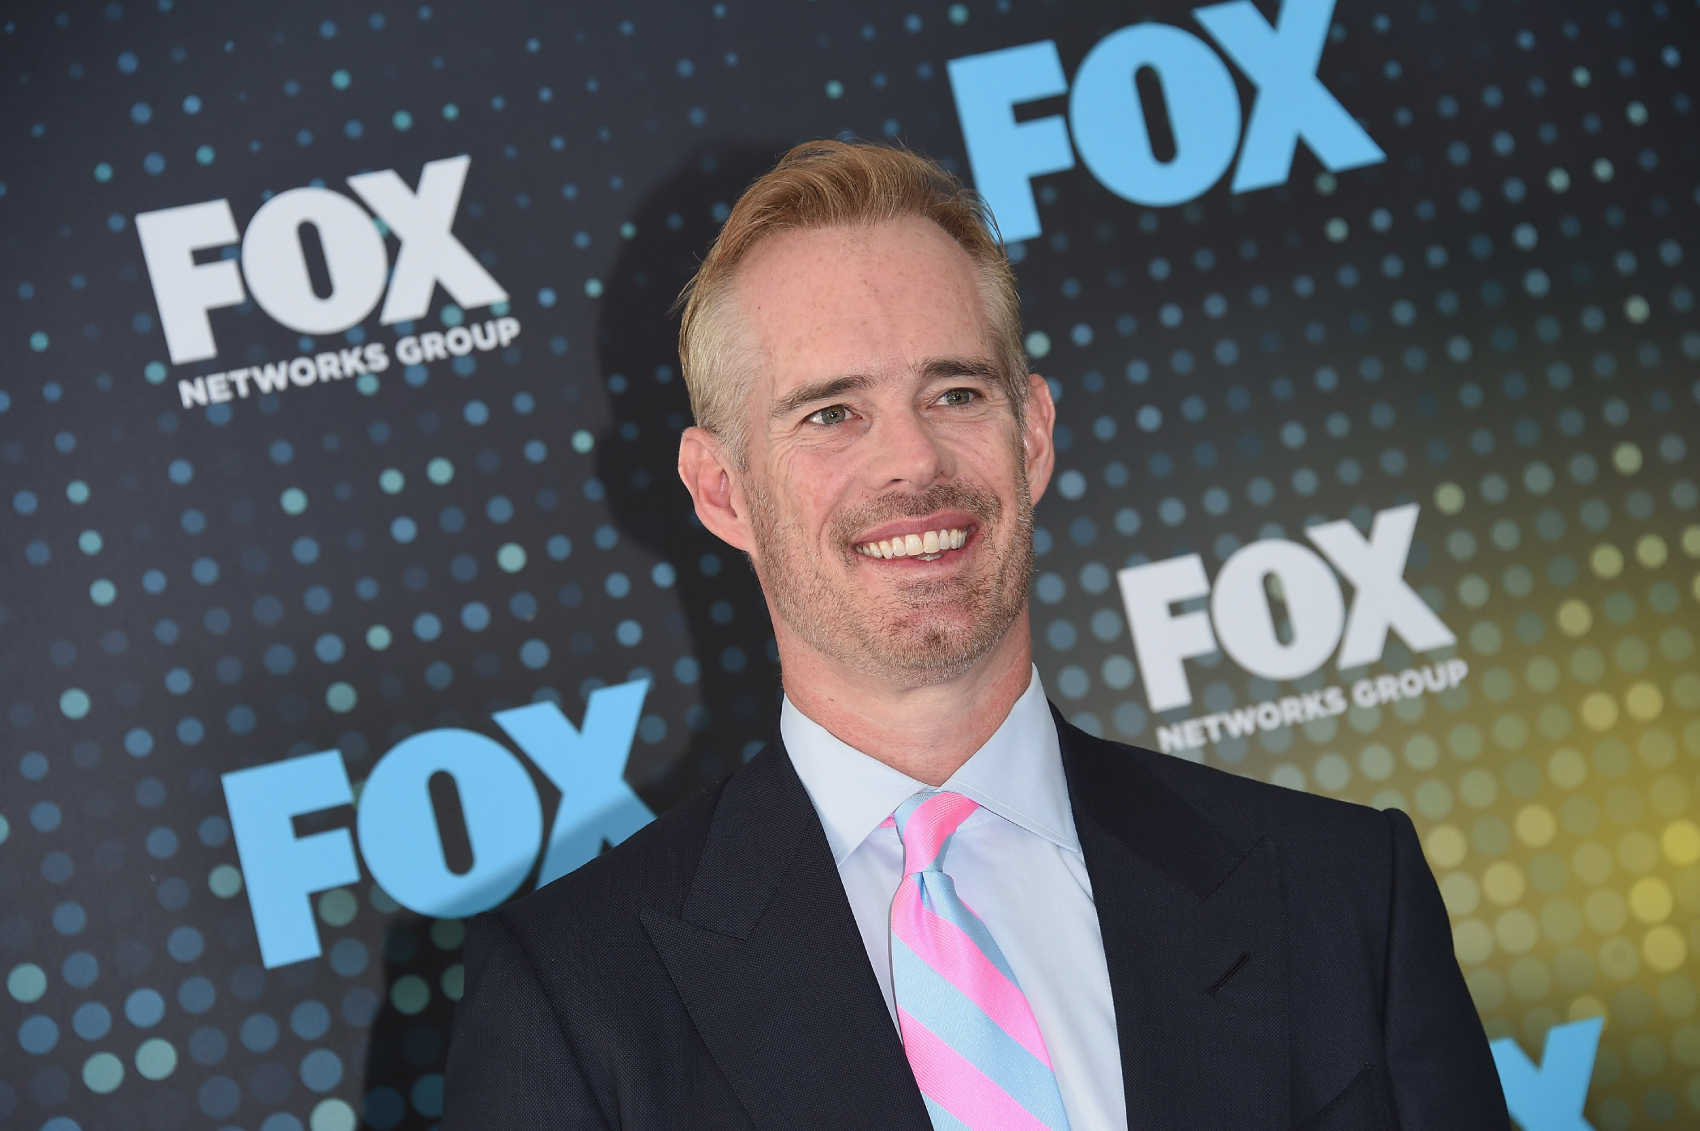 While many sports broadcasters have to watch what they say in the moment, fans are bringing up comments made by Joe Buck from 16 years ago.